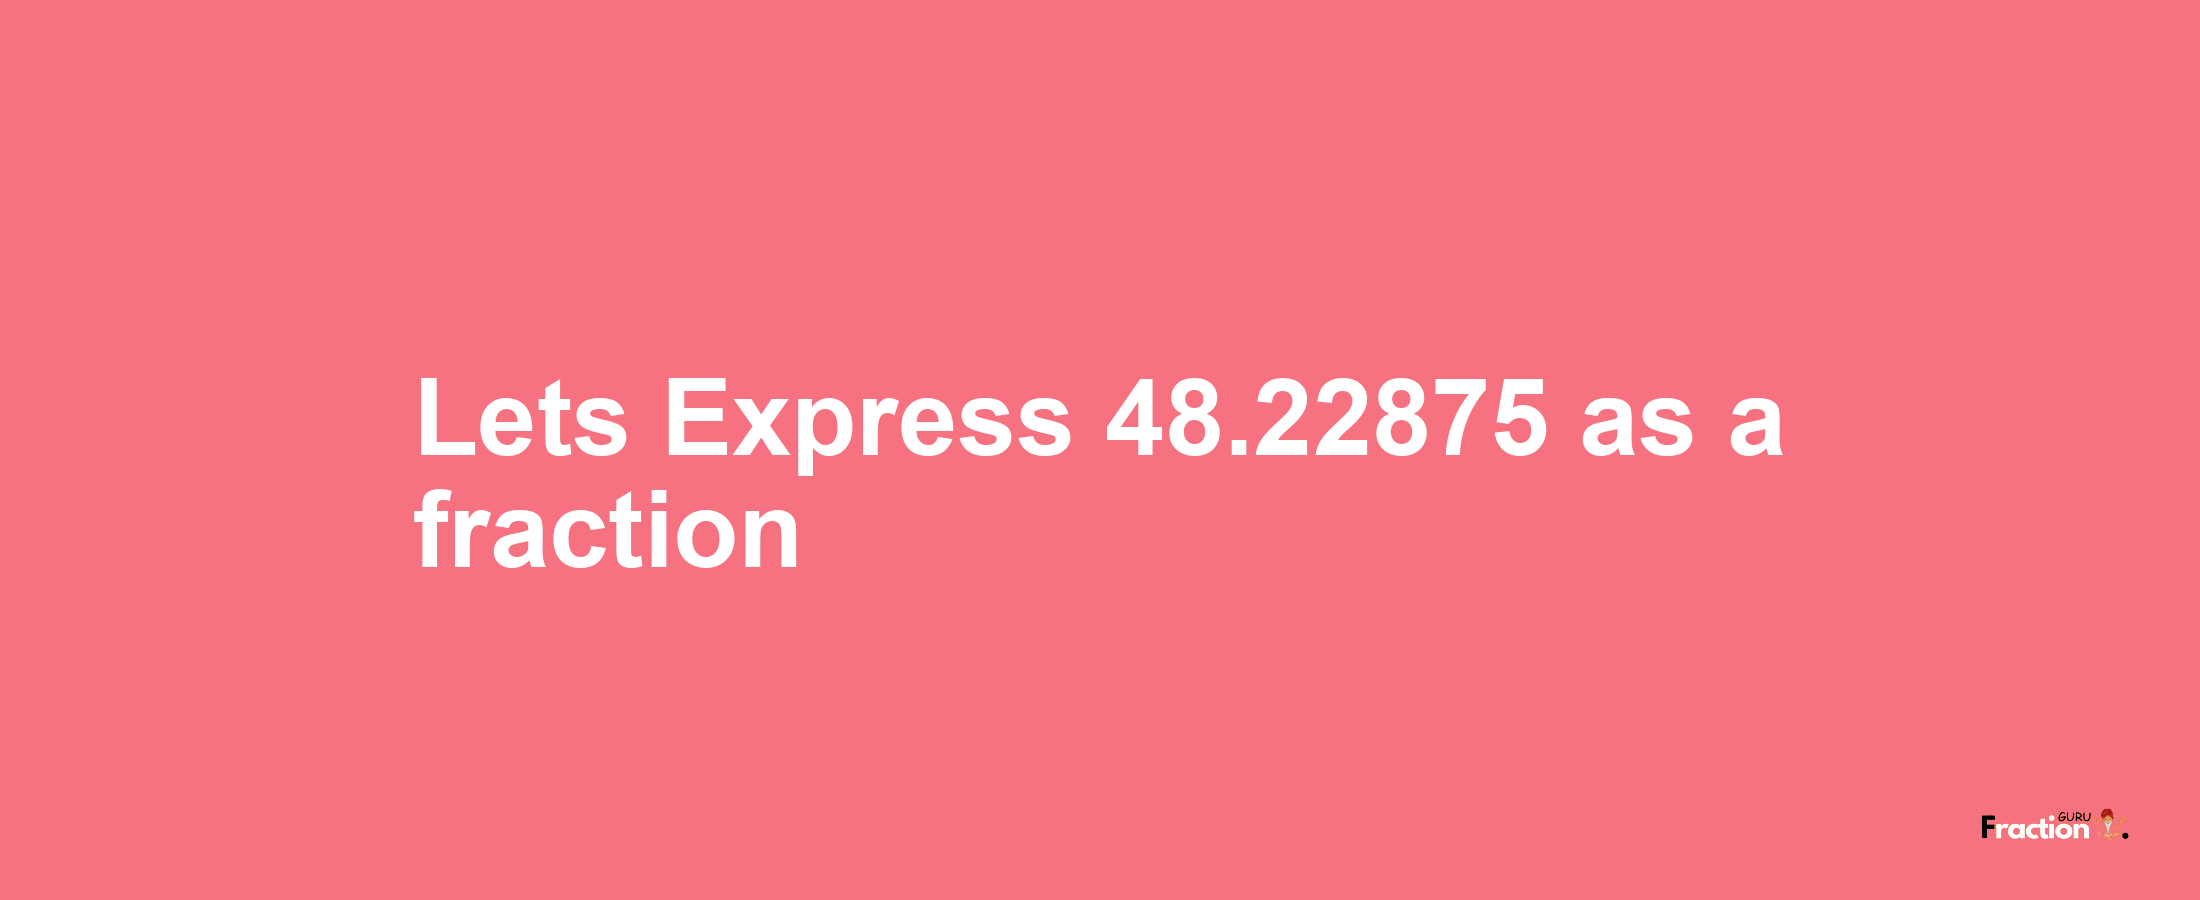 Lets Express 48.22875 as afraction